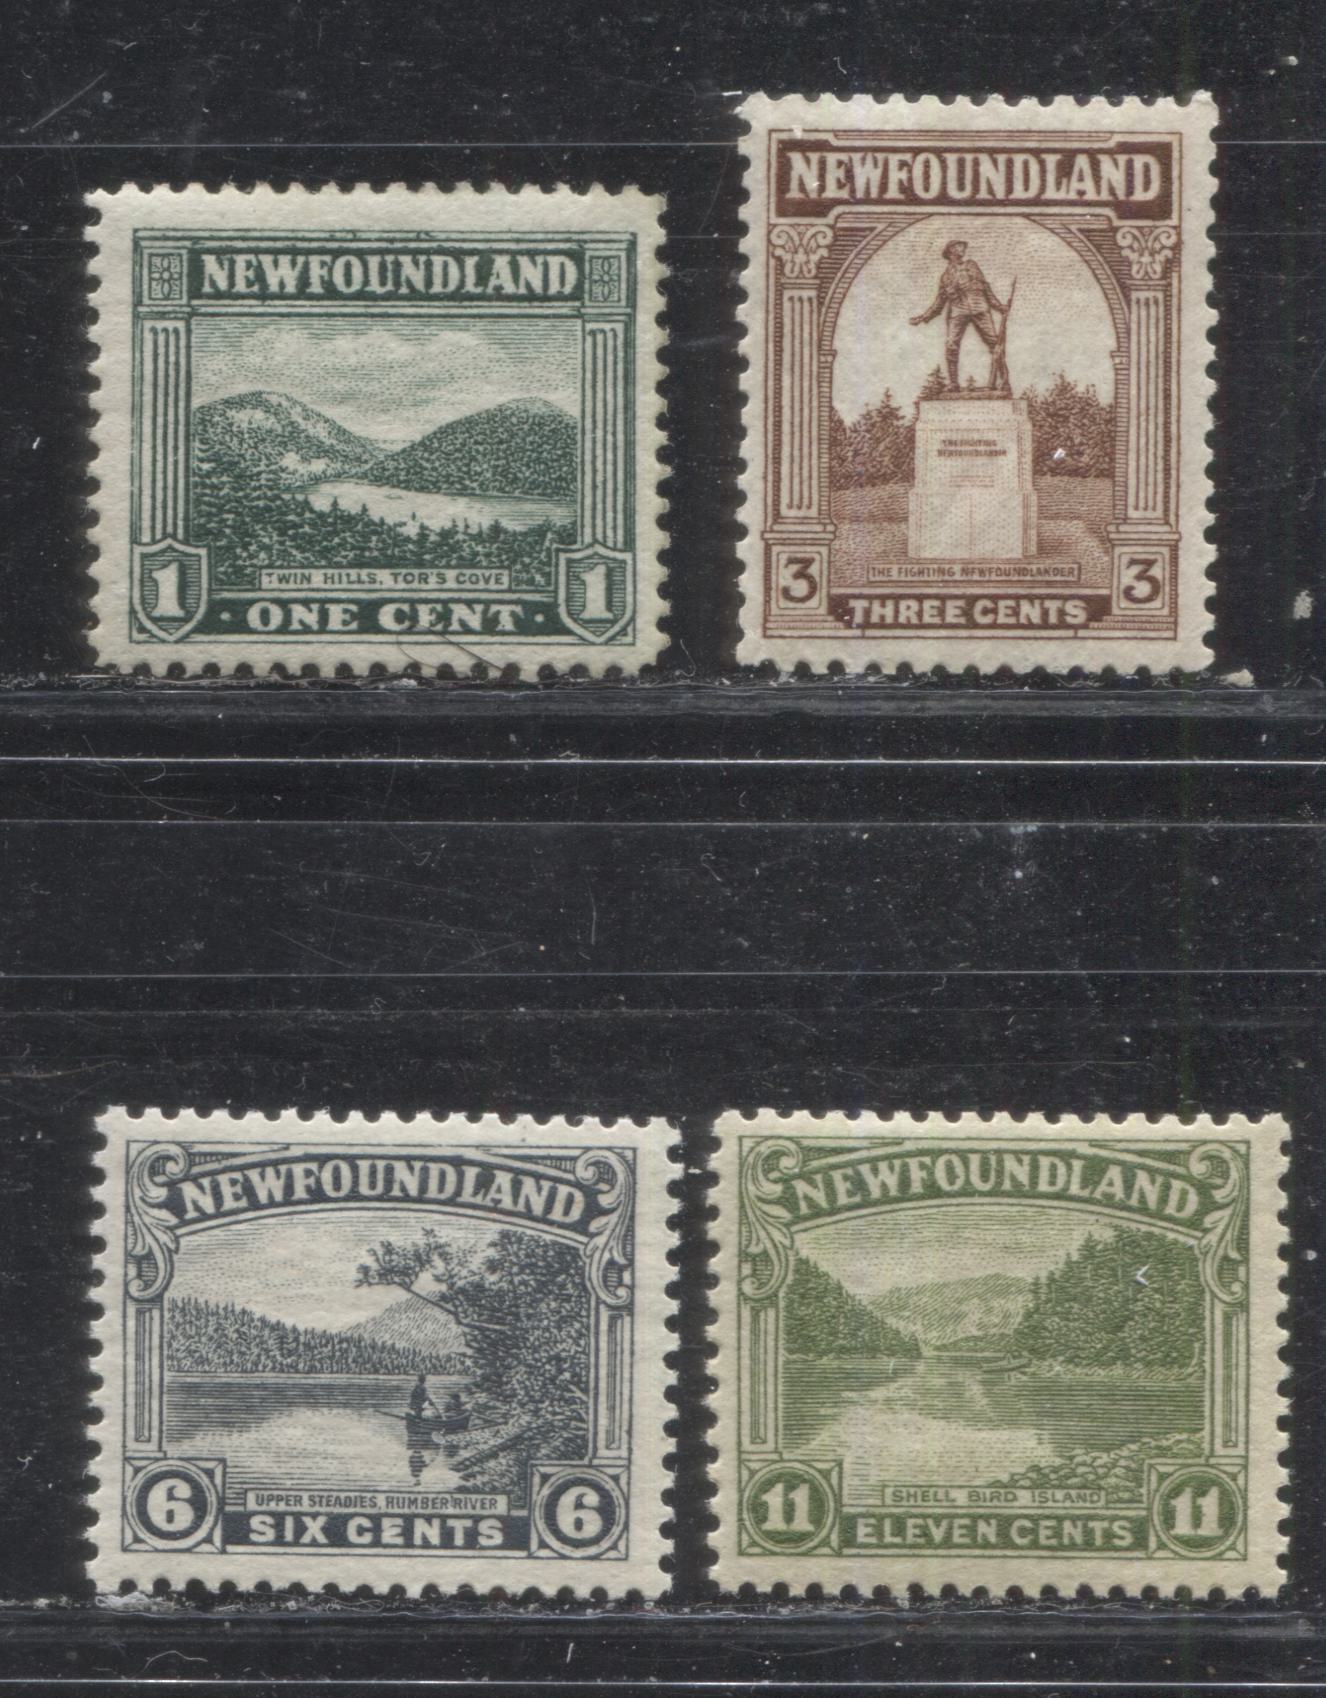 Lot 52 Newfoundland # 131/140 1c, 3c, 6c and 11c Dark Green - Apple Green Twin Hills - Shell Bird Island, 1923-1928 Pictorial Issue, Four Fine NH Examples, Line Perf. 14.2 x 14.1 and Comb Perf. 14 x 13.8